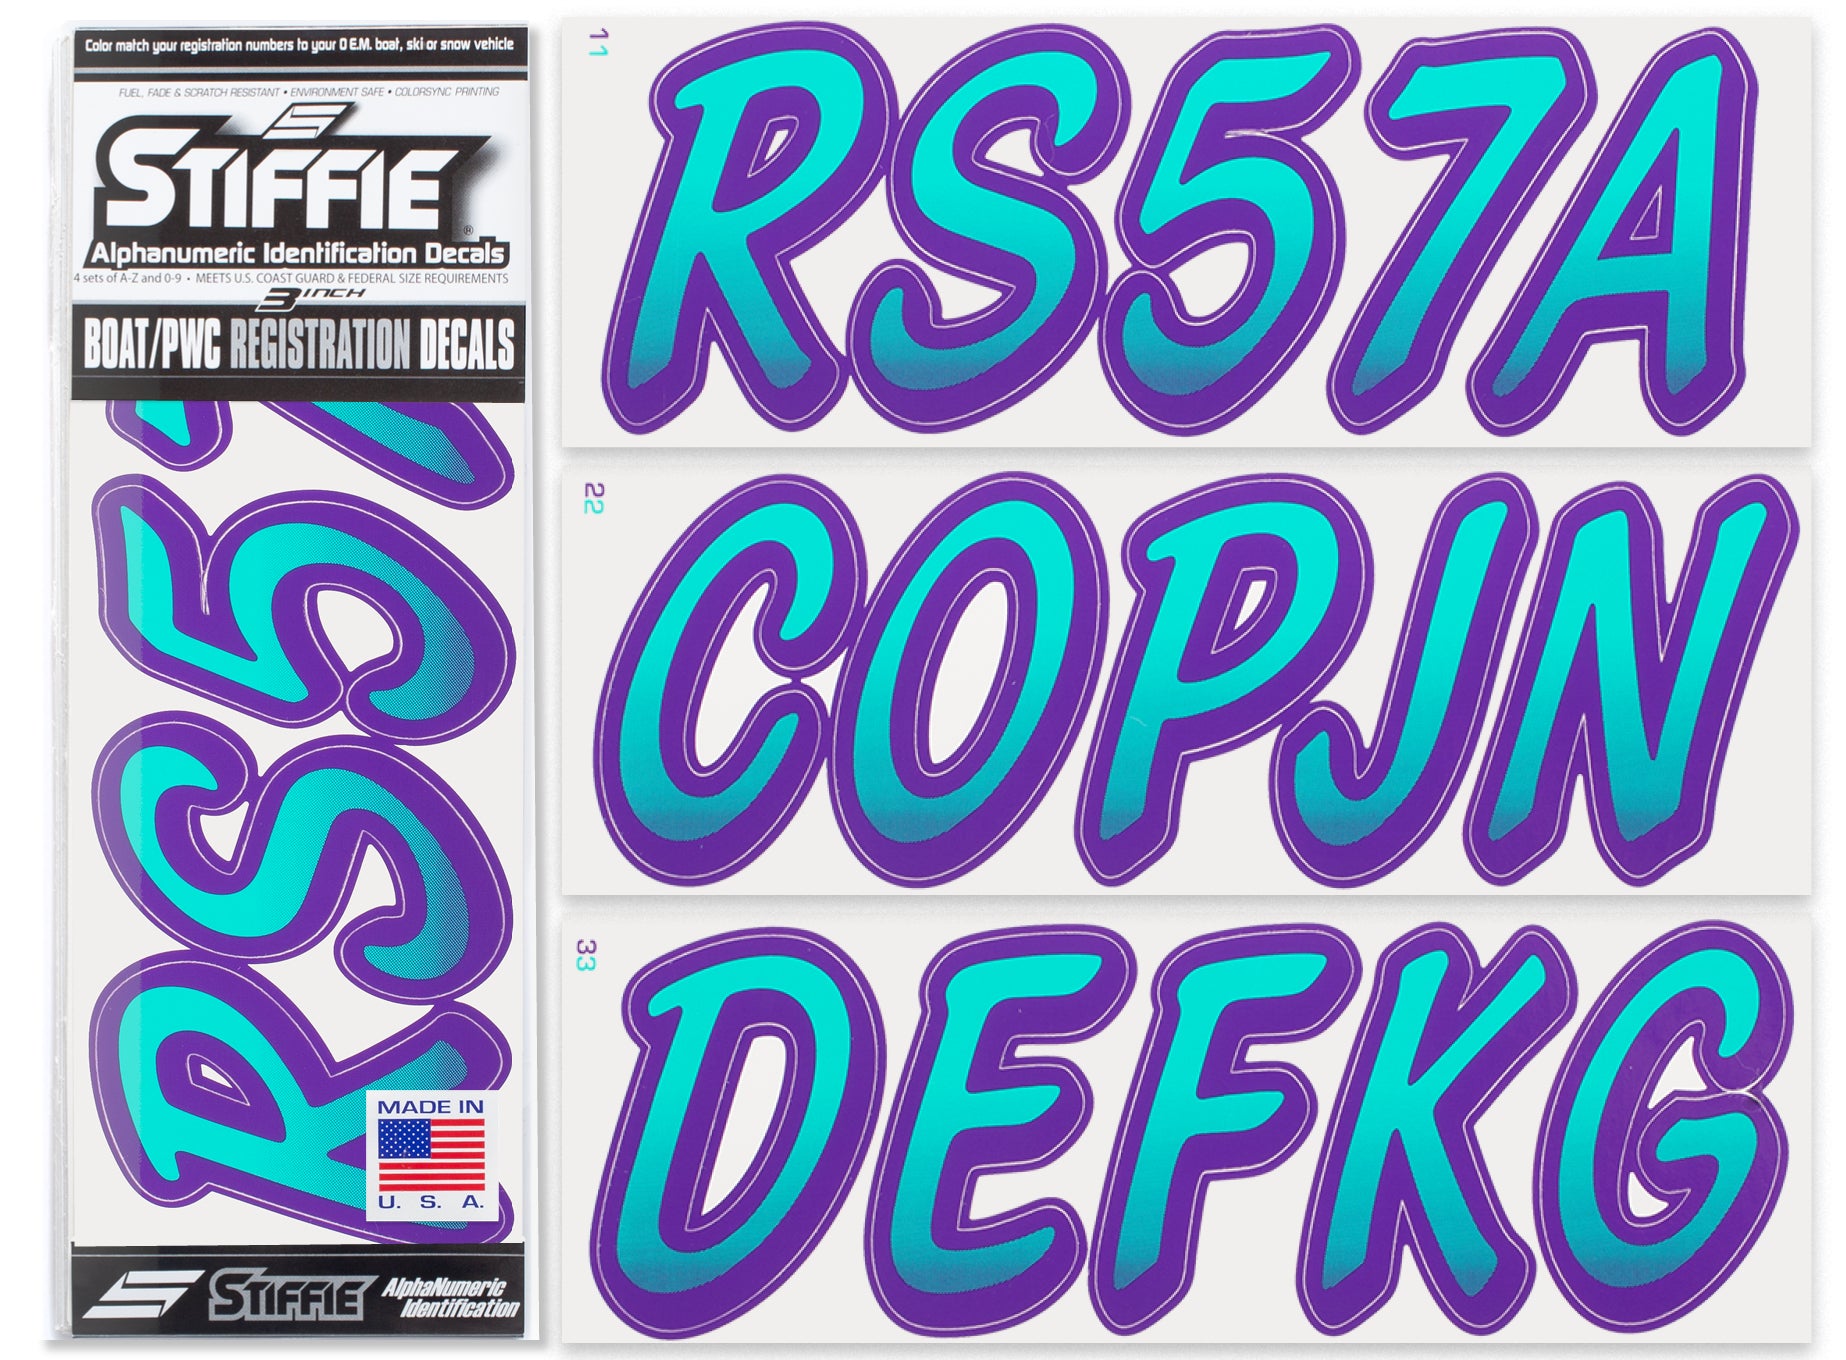 STIFFIE Whipline Sea Teal/Purple 3" Alpha-Numeric Registration Identification Numbers Stickers Decals for Boats & Personal Watercraft